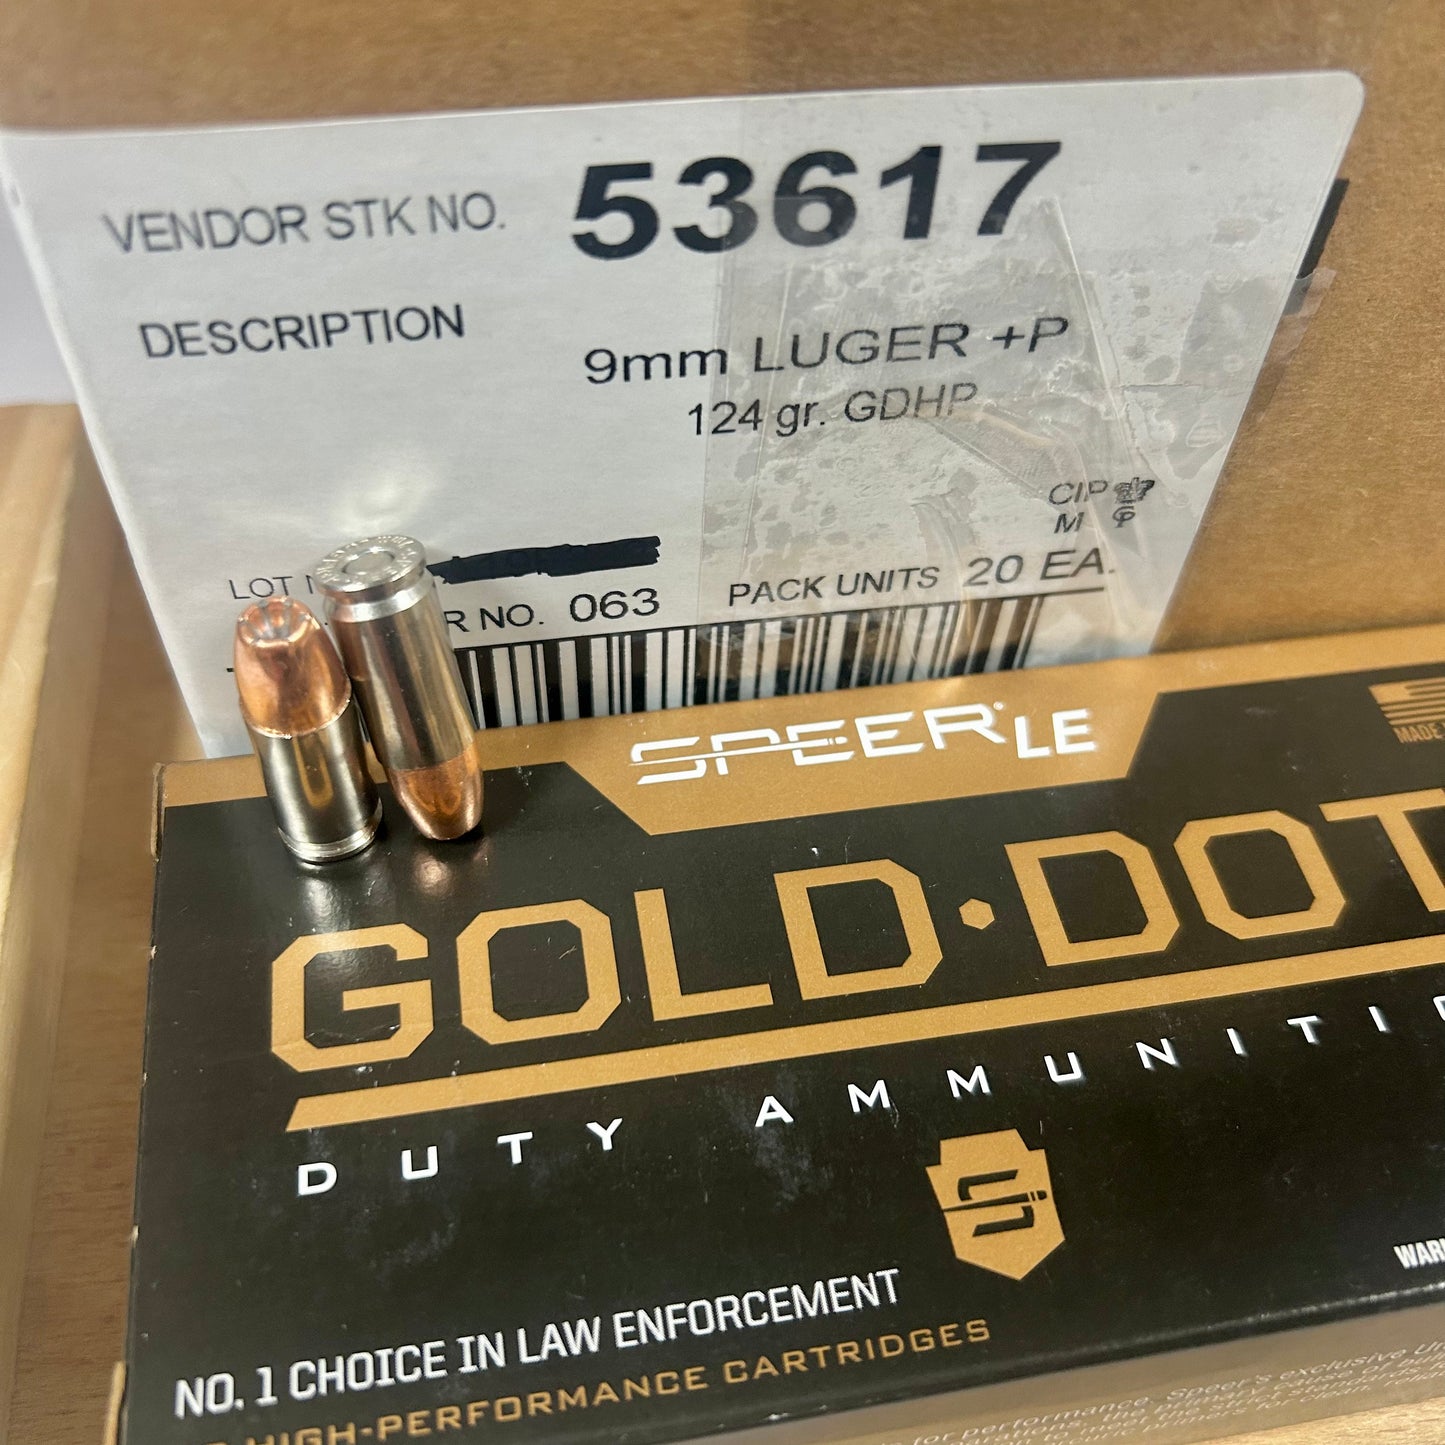 Free Shipping - 1000 Round Case Speer Gold Dot 9mm Luger +P Ammo 124gr GDHP - 53617